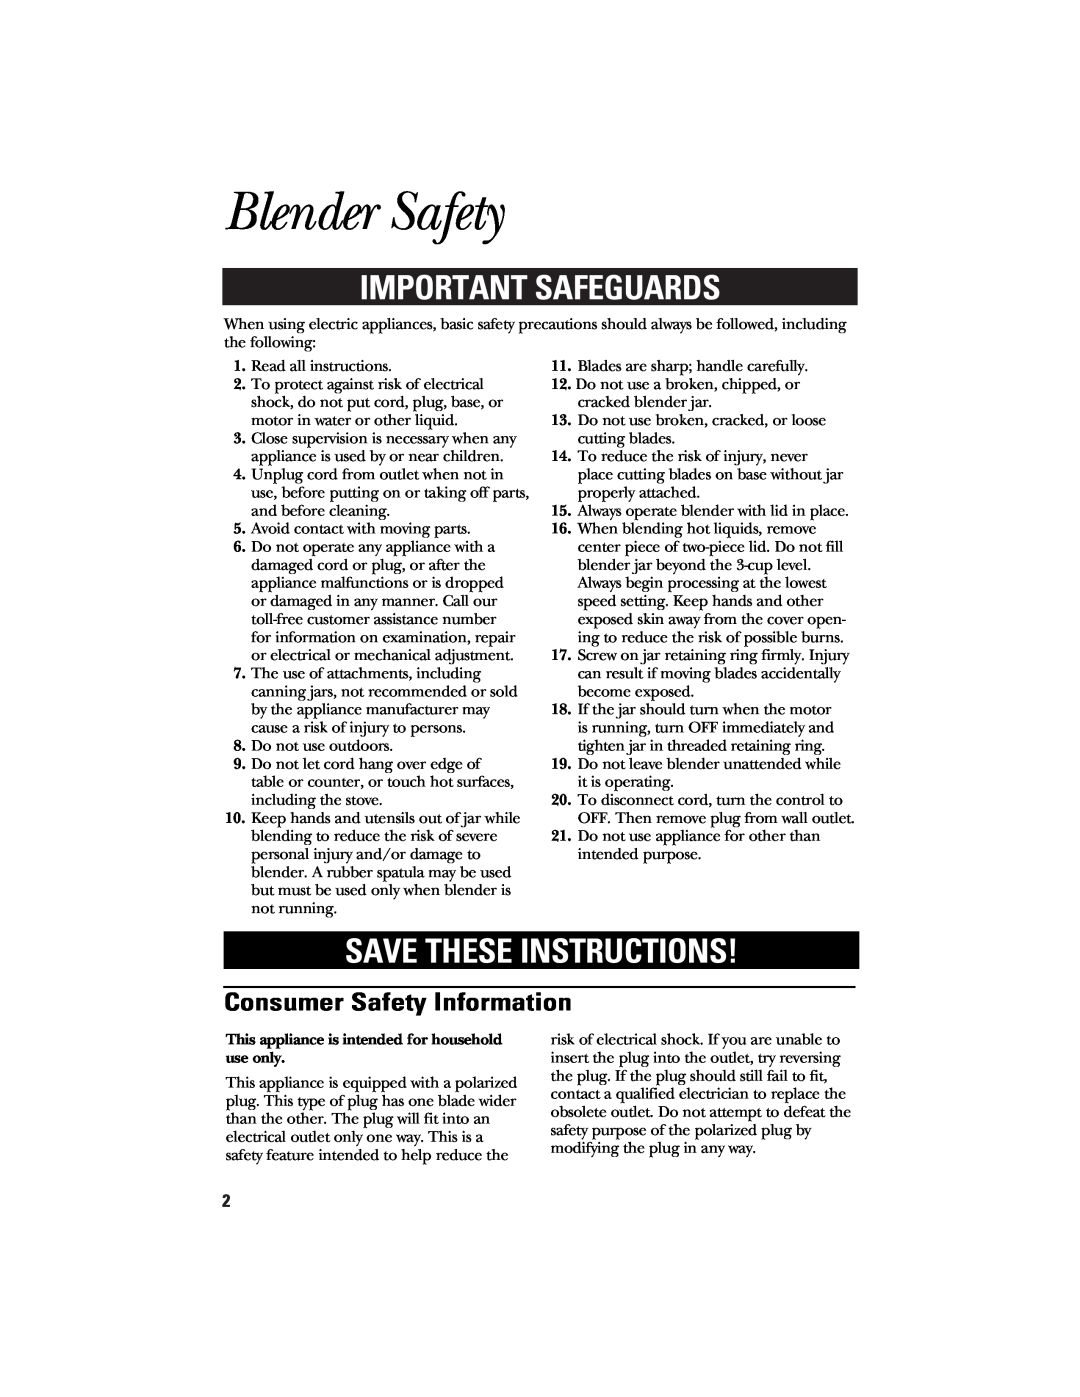 GE 106644, 840078900 manual Blender Safety, Important Safeguards, Save These Instructions, Consumer Safety Information 